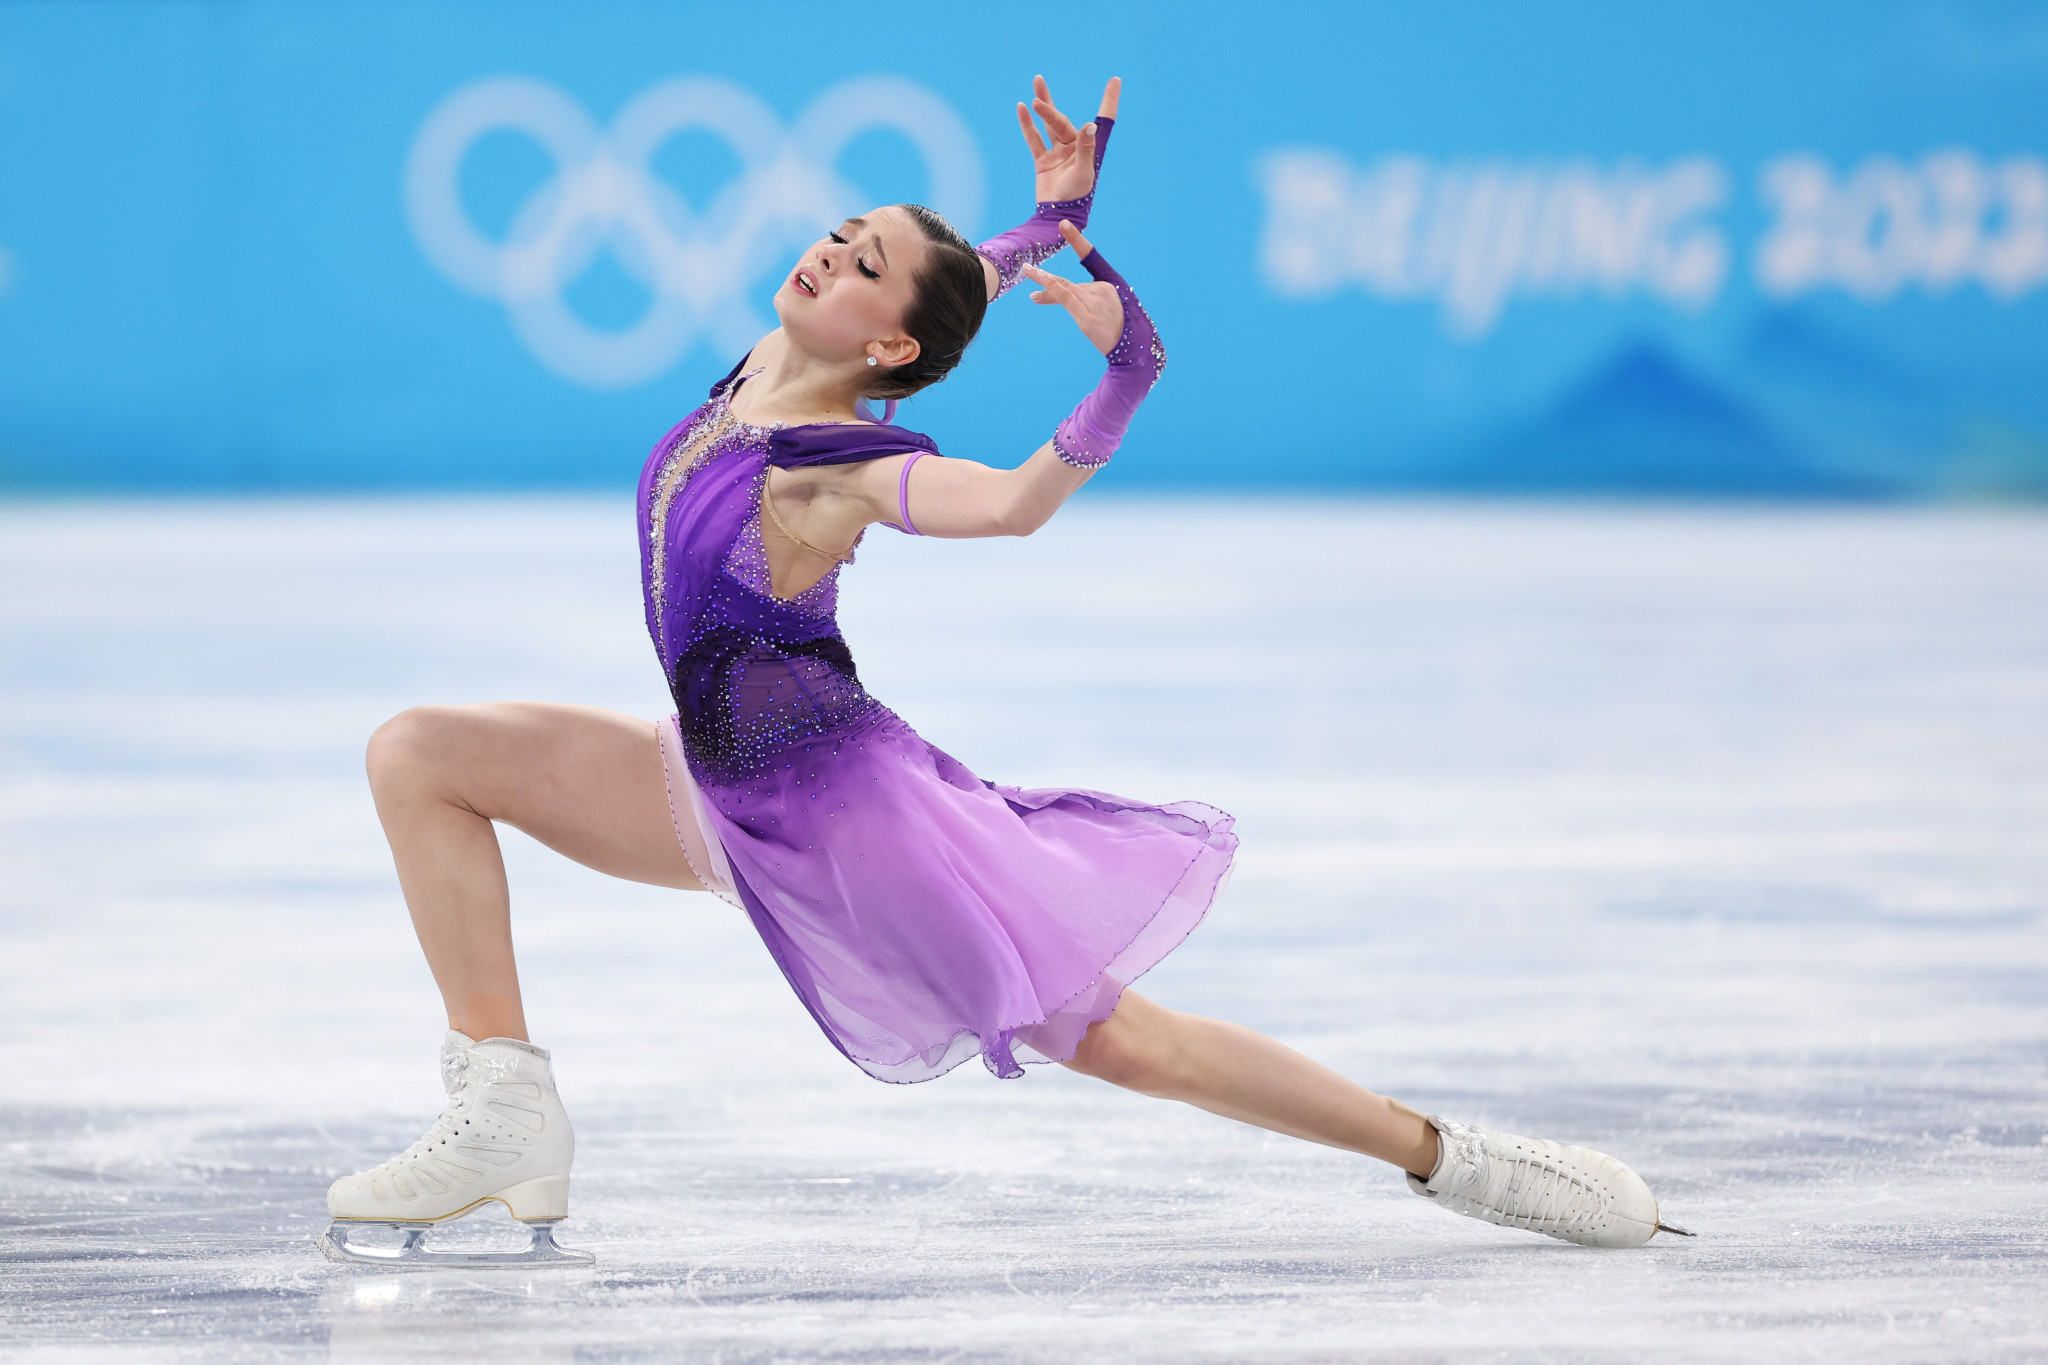 Kamila Valieva helped the Russian Olympic Committee to gold in the figure skating team event at Beijing 2022, but this remains subject to an ongoing doping case ©Getty Images